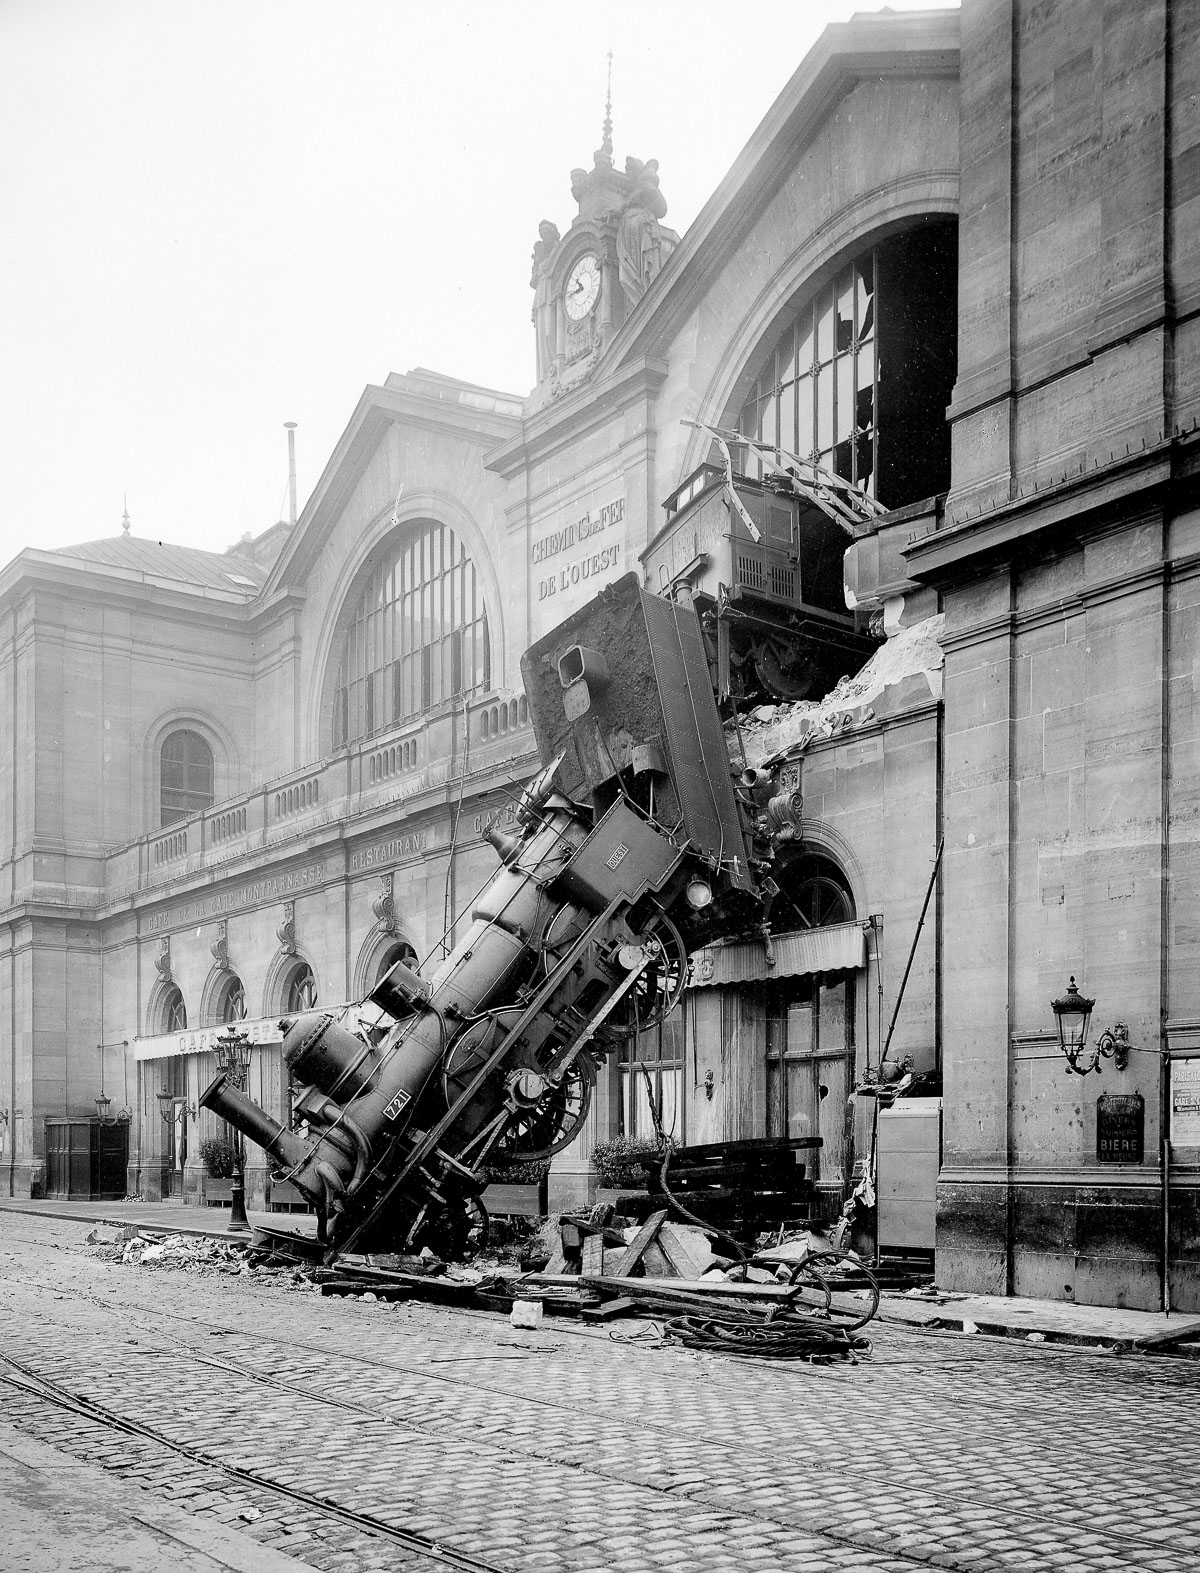 FRANCE - 1895:  The accident of the station Montparnasse. Paris, October 22, 1895. ND-2896A Paris.  (Photo by ND/Roger Viollet/Getty Images)